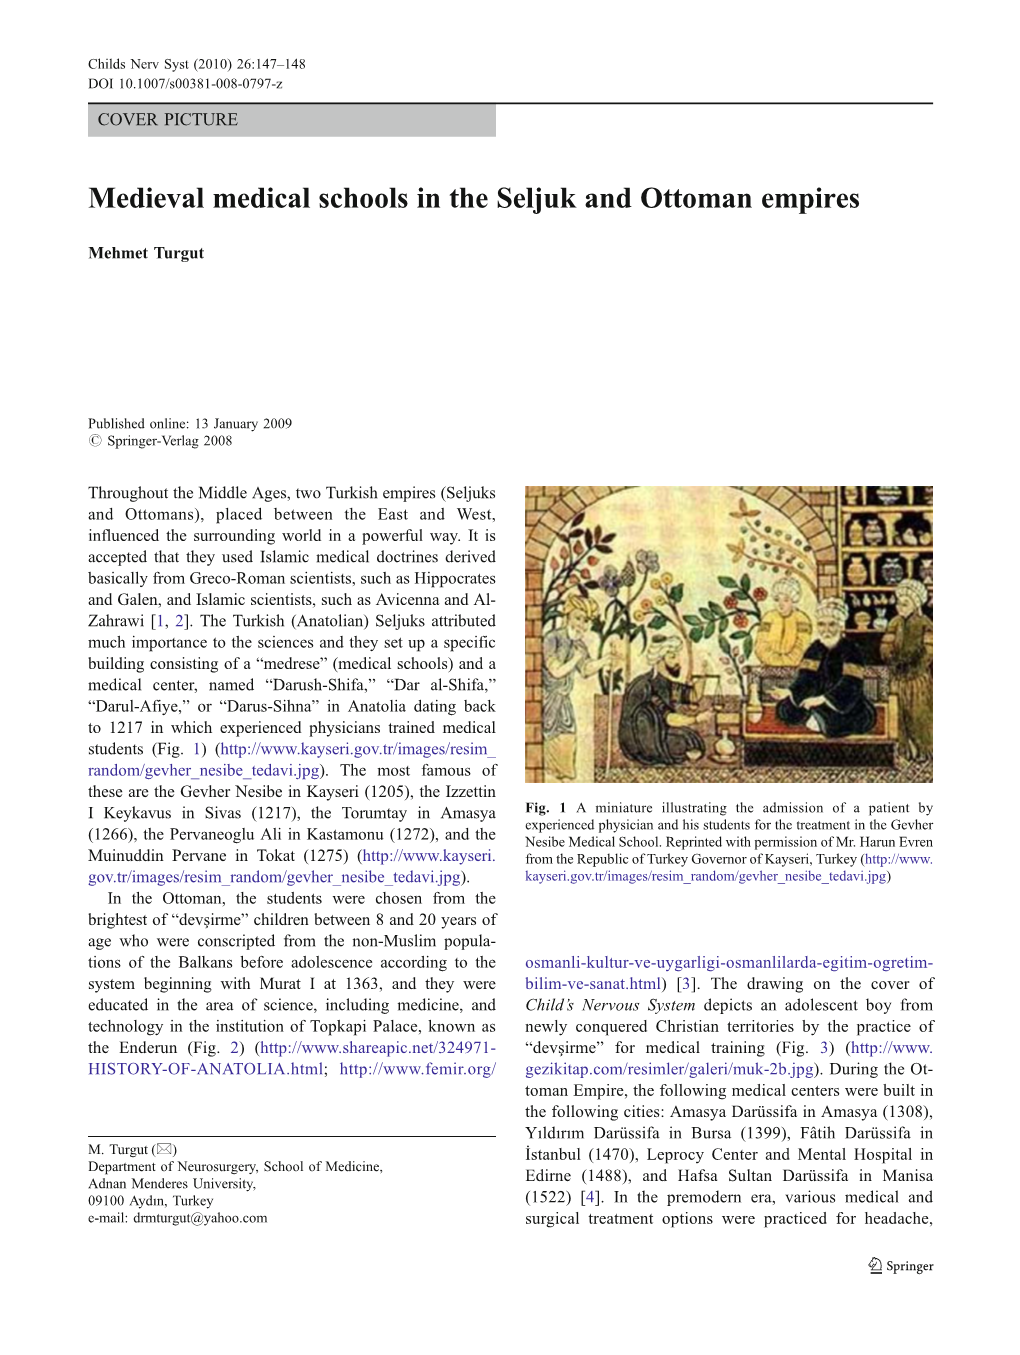 Medieval Medical Schools in the Seljuk and Ottoman Empires